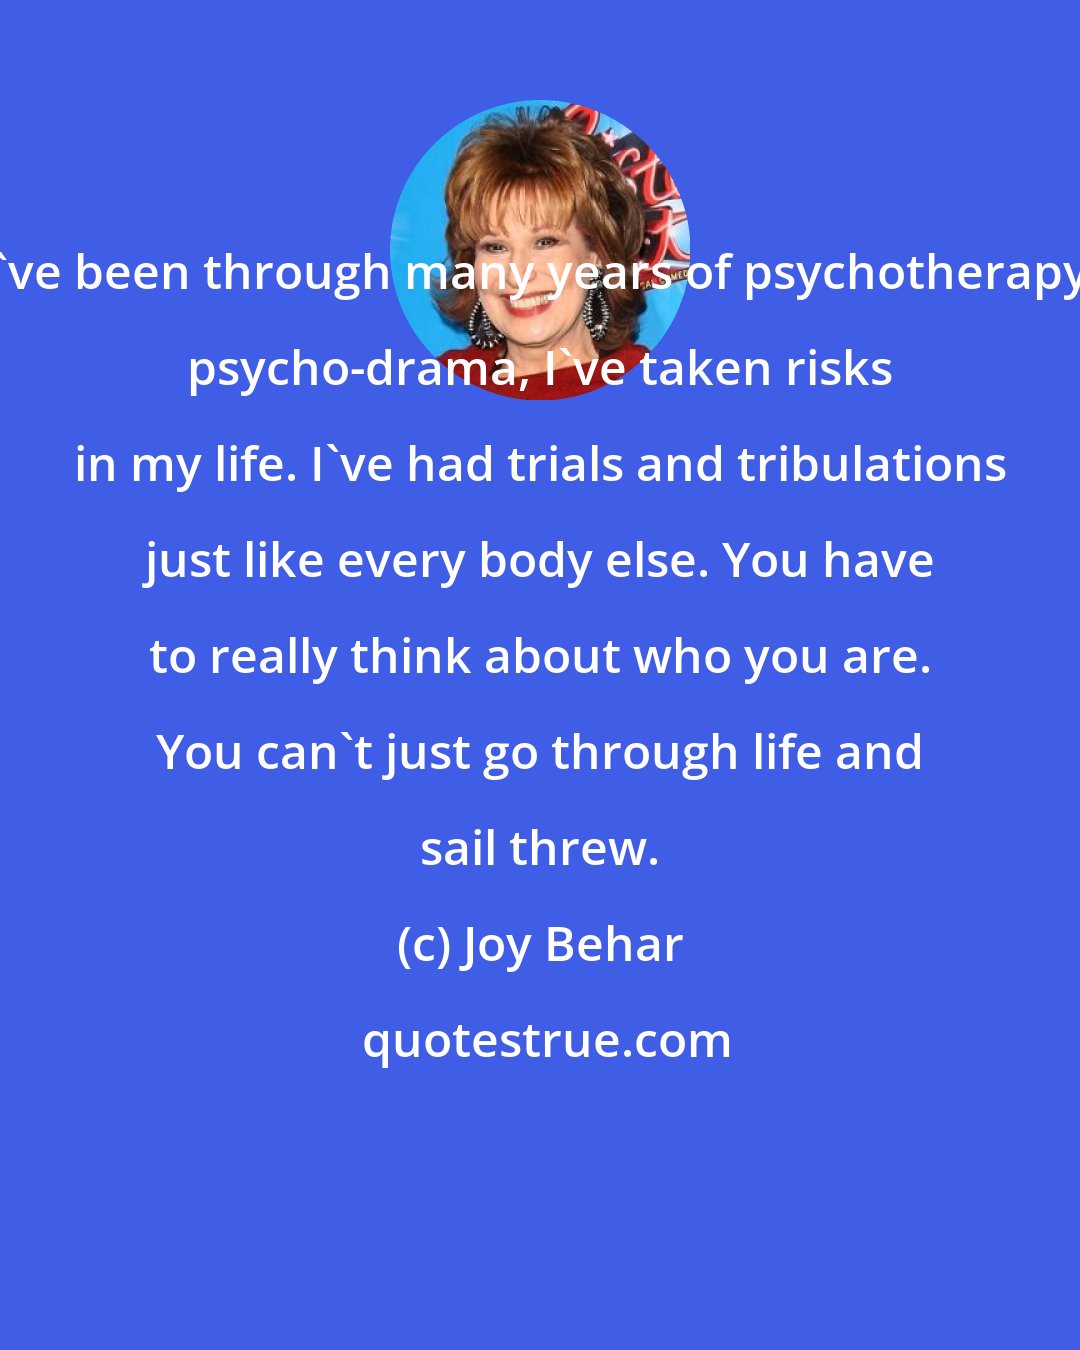 Joy Behar: I've been through many years of psychotherapy, psycho-drama, I've taken risks in my life. I've had trials and tribulations just like every body else. You have to really think about who you are. You can't just go through life and sail threw.